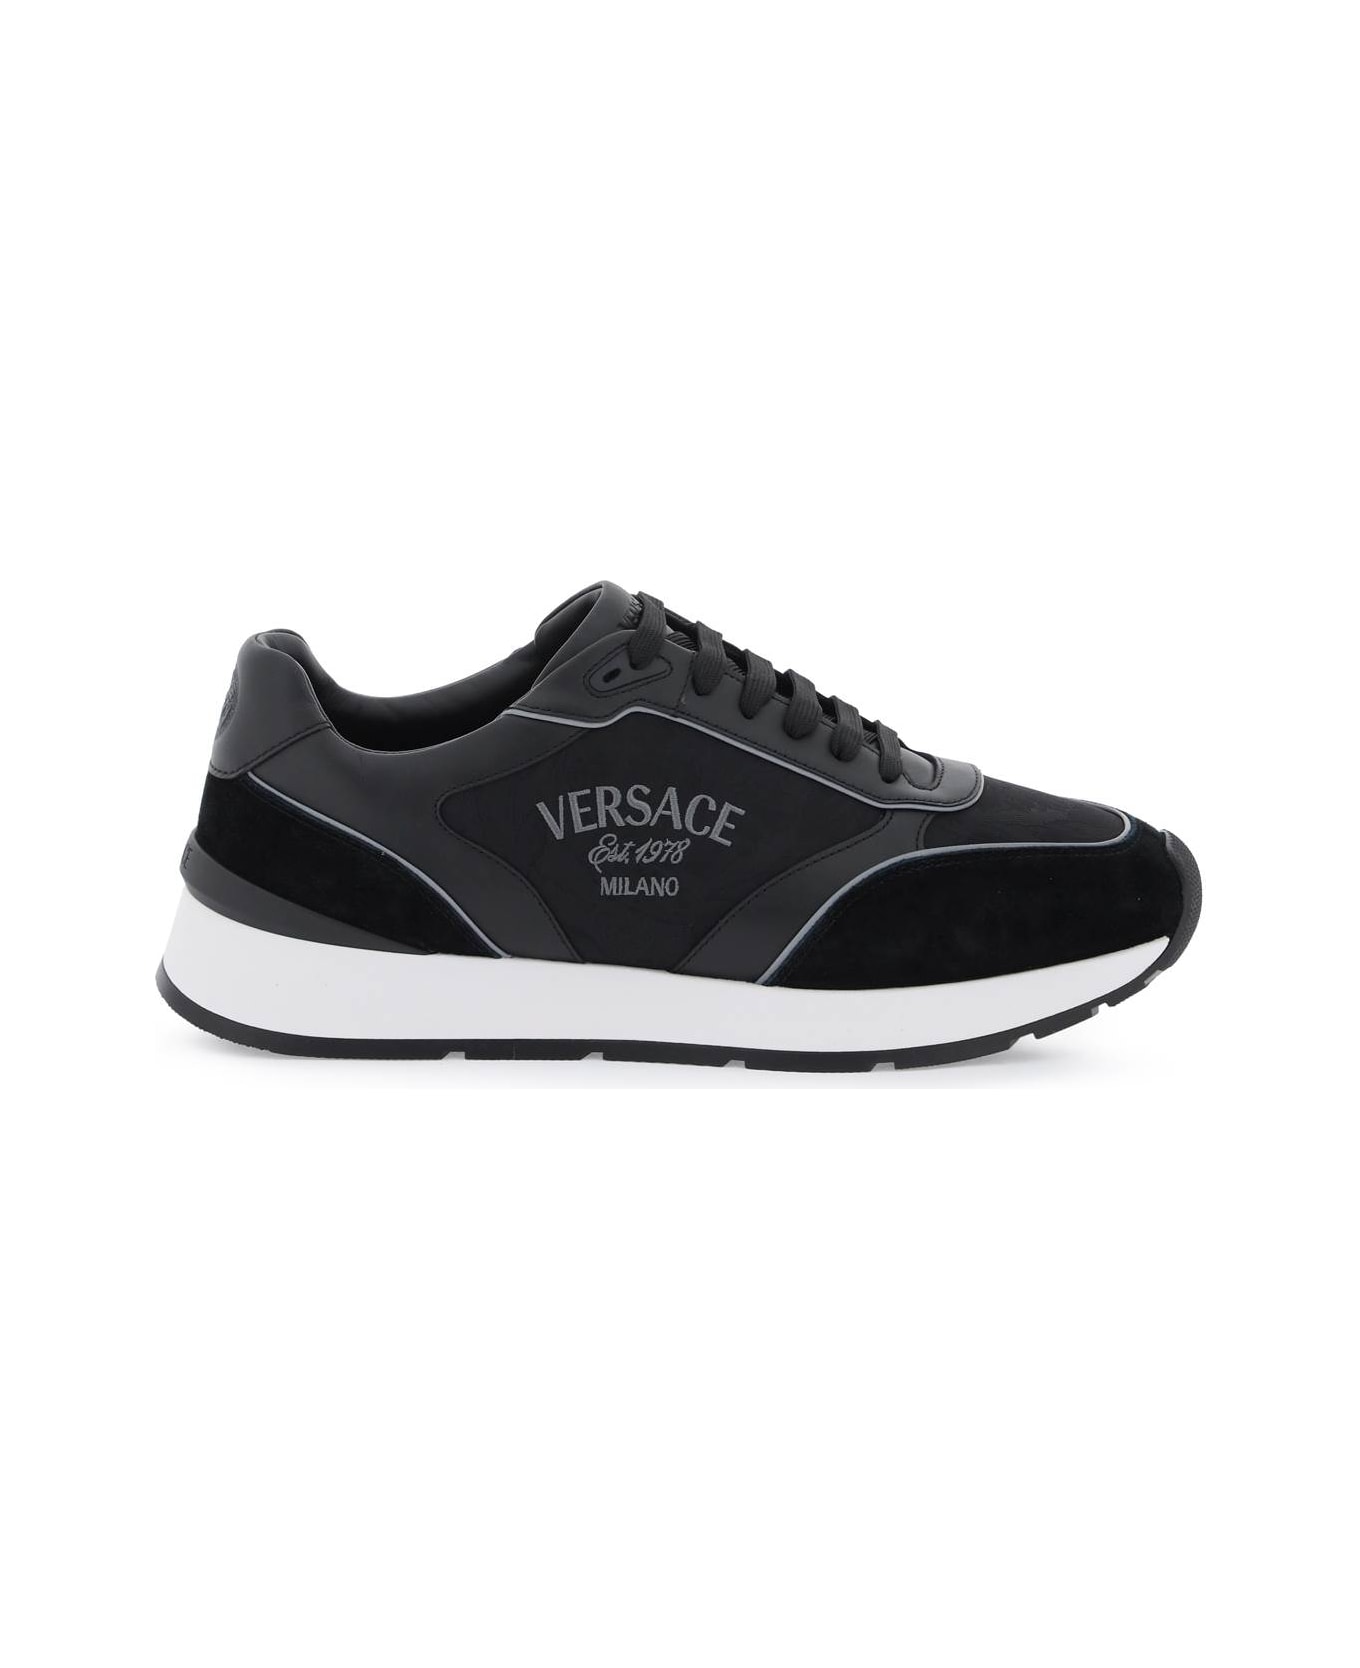 Versace Milano Round-toe Lace-up Sneakers - BLACK (Black)